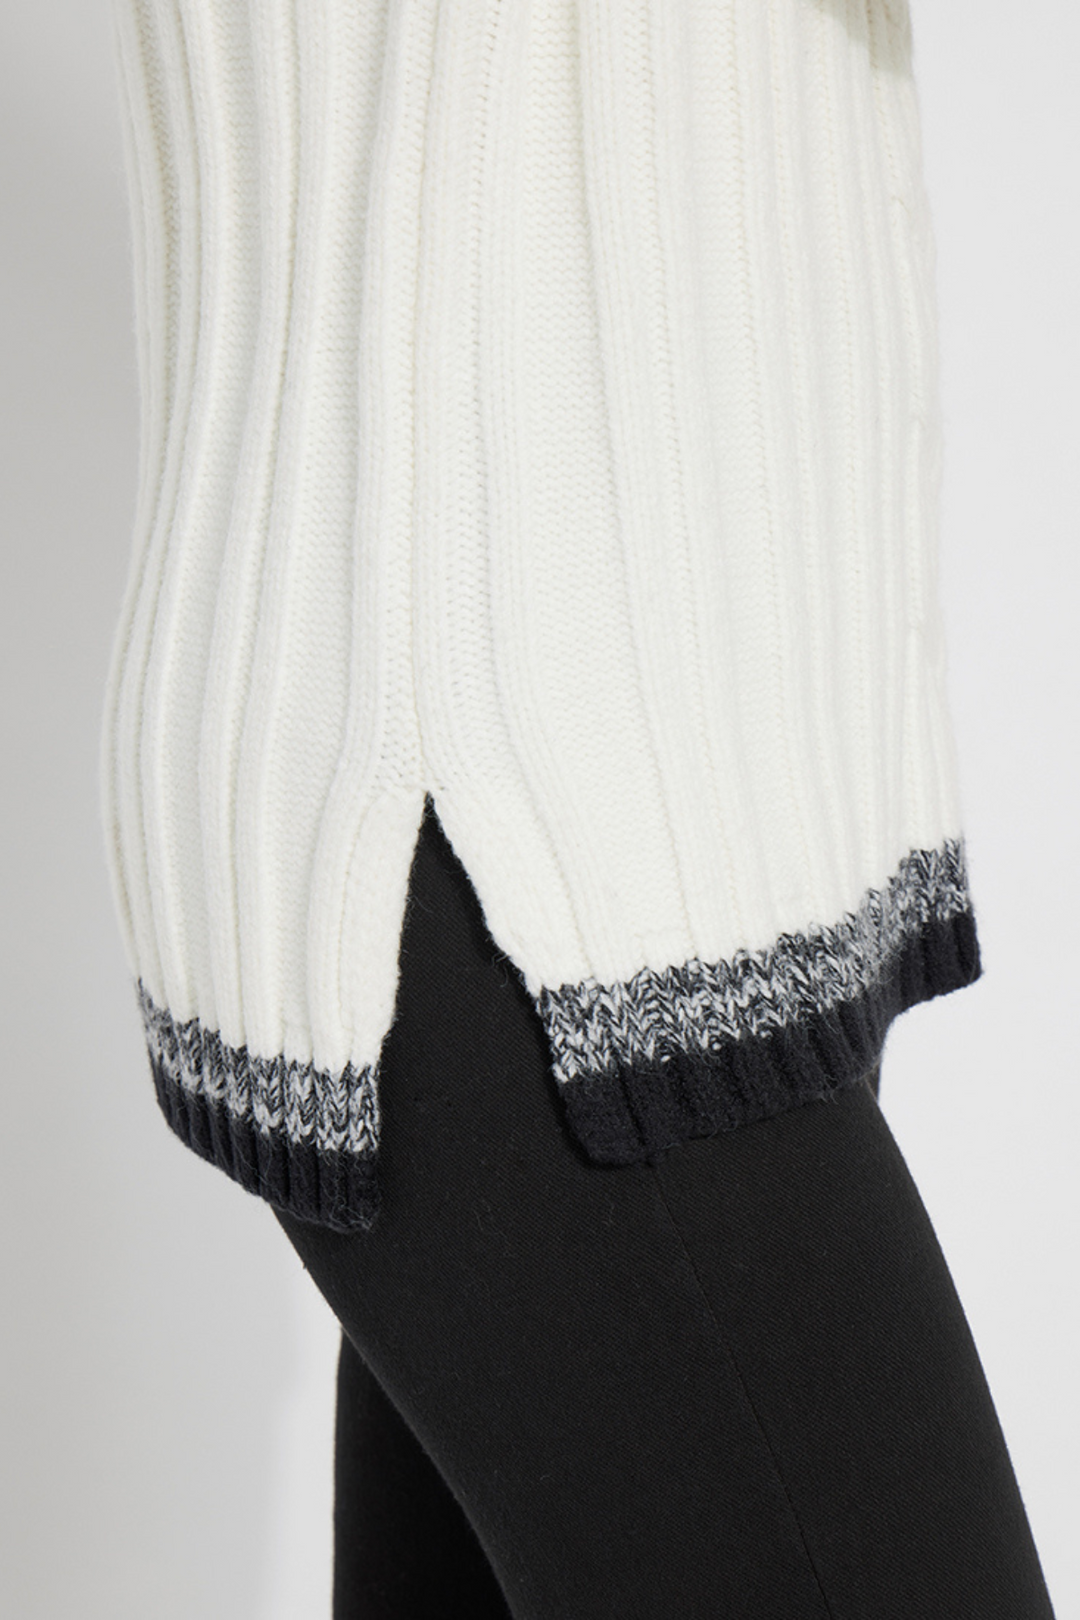 LYSSE | Cozy Cable Alana Sweater